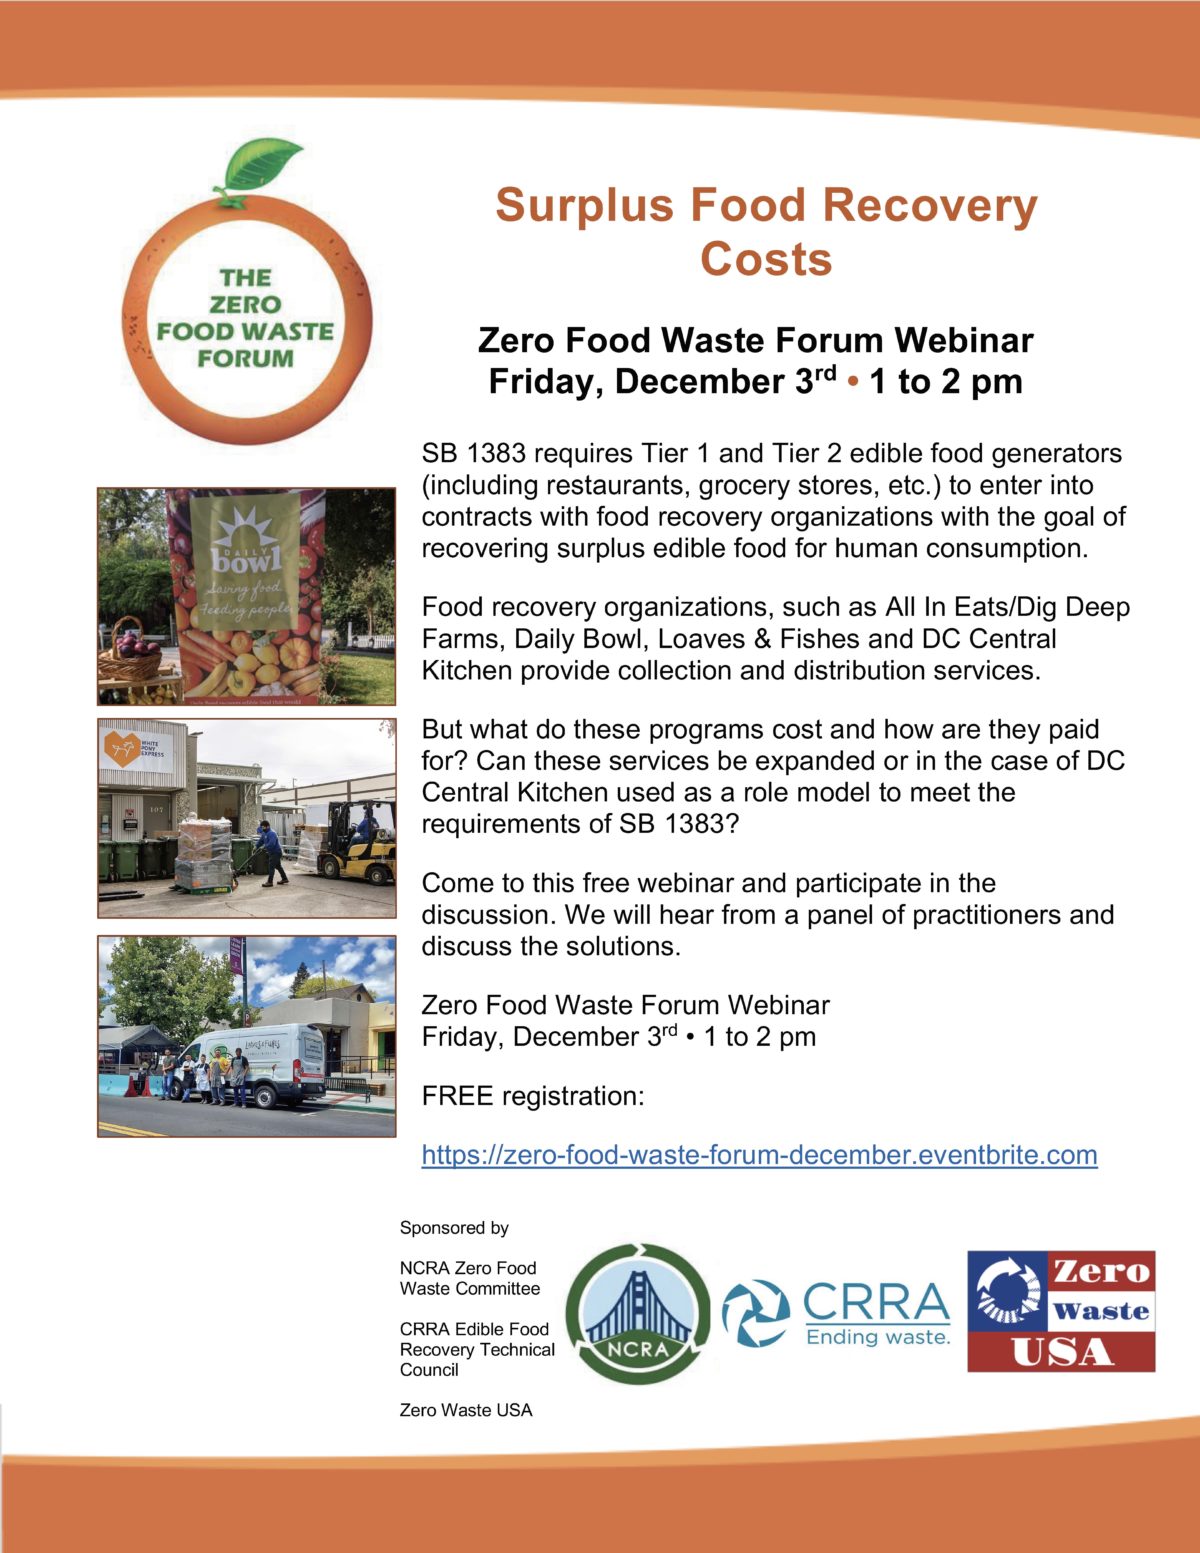 Surplus Food Recovery Costs, 12/3/21